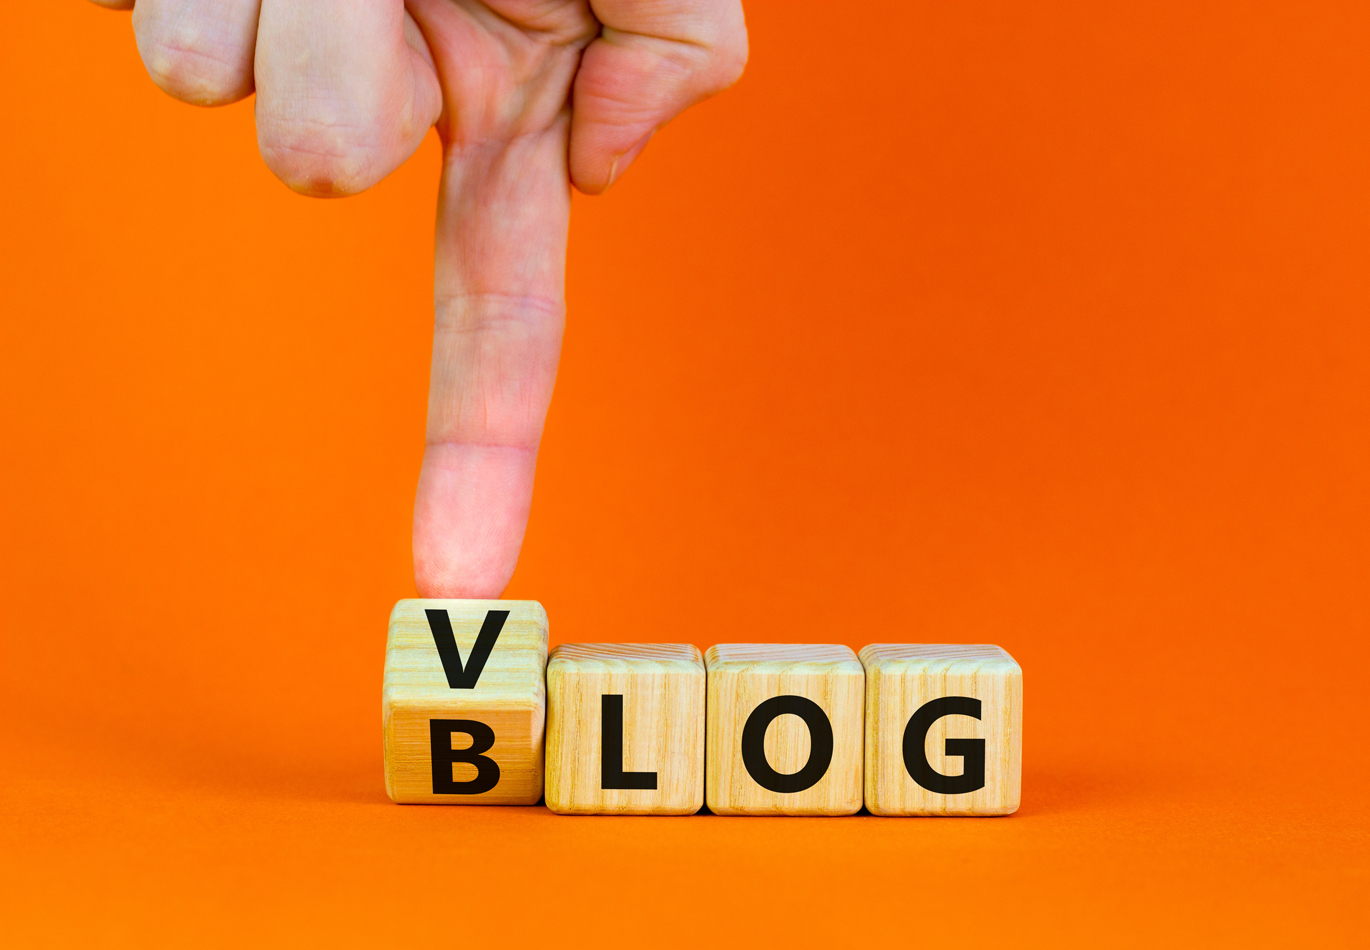 Blog or Vlog: What to Choose for Your Brand?